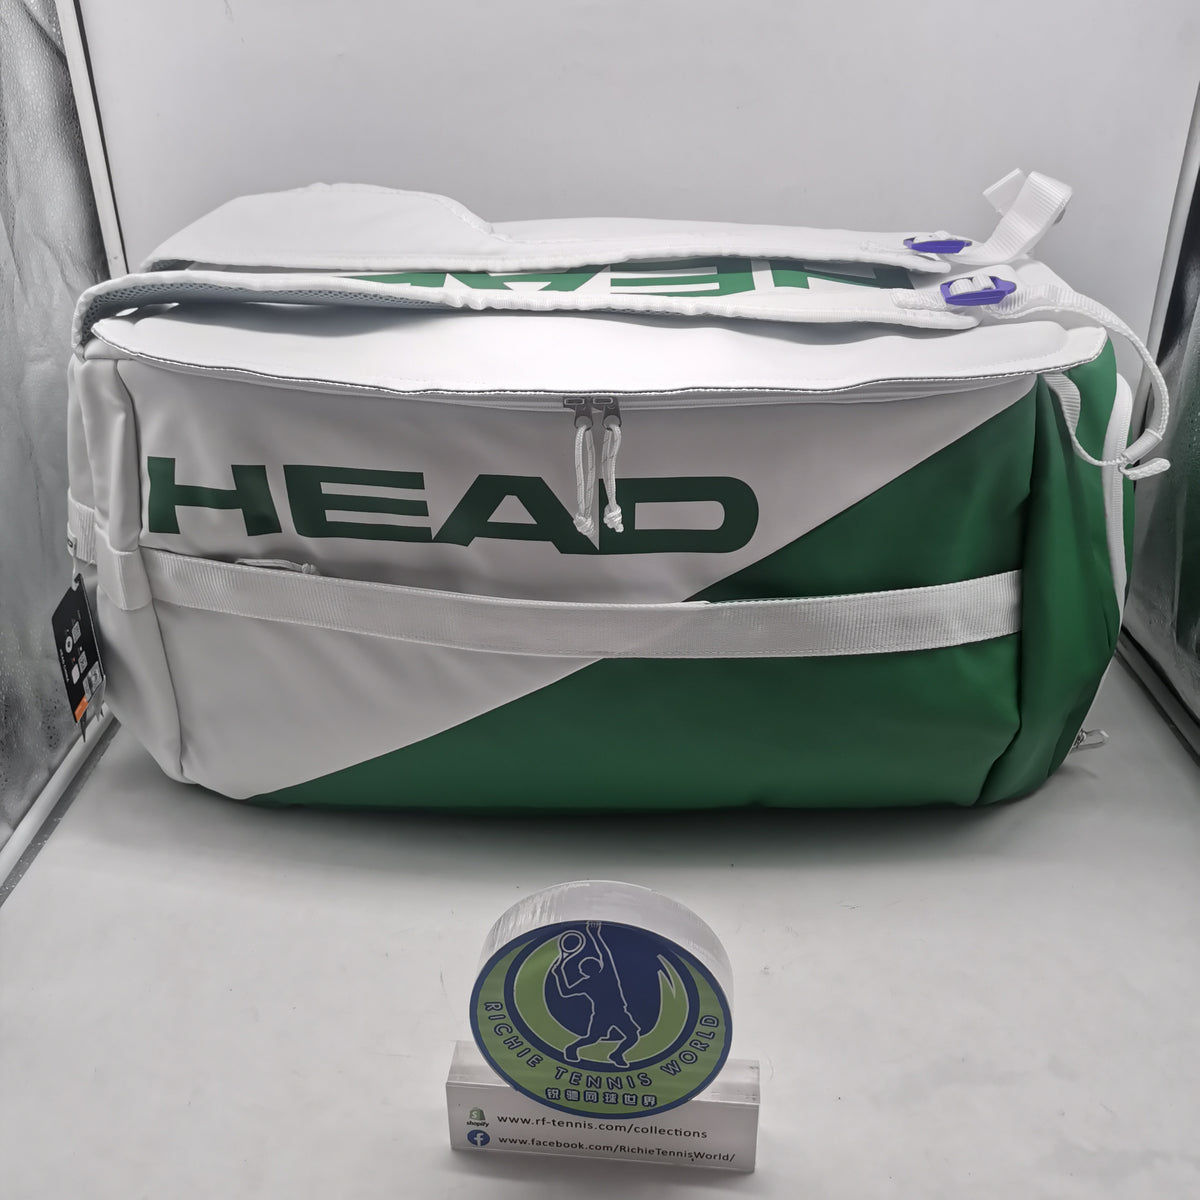 HEAD Pro Player Tennis Duffel Bag Wimbledon Limited edition Large Whit